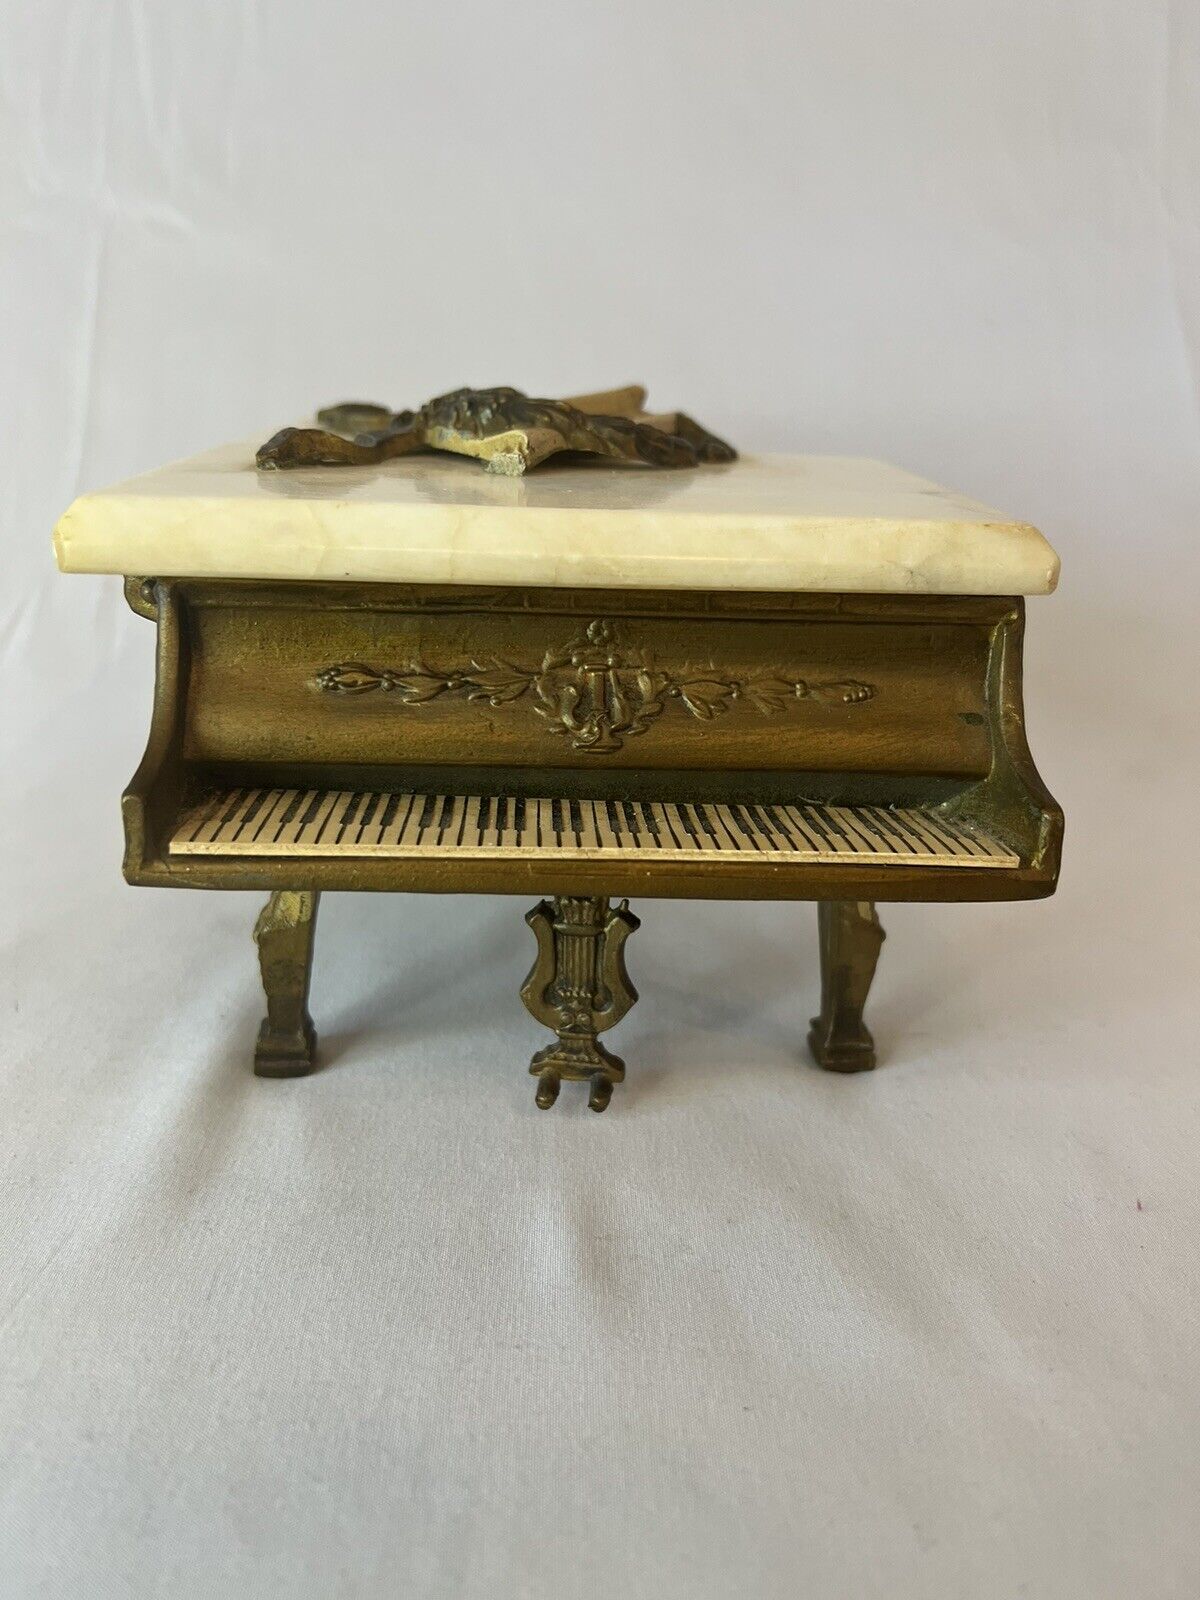 ANTIQUE 1920s THORENS GRAND PIANO MUSIC BOX WORKS GREAT MARBLE TOP